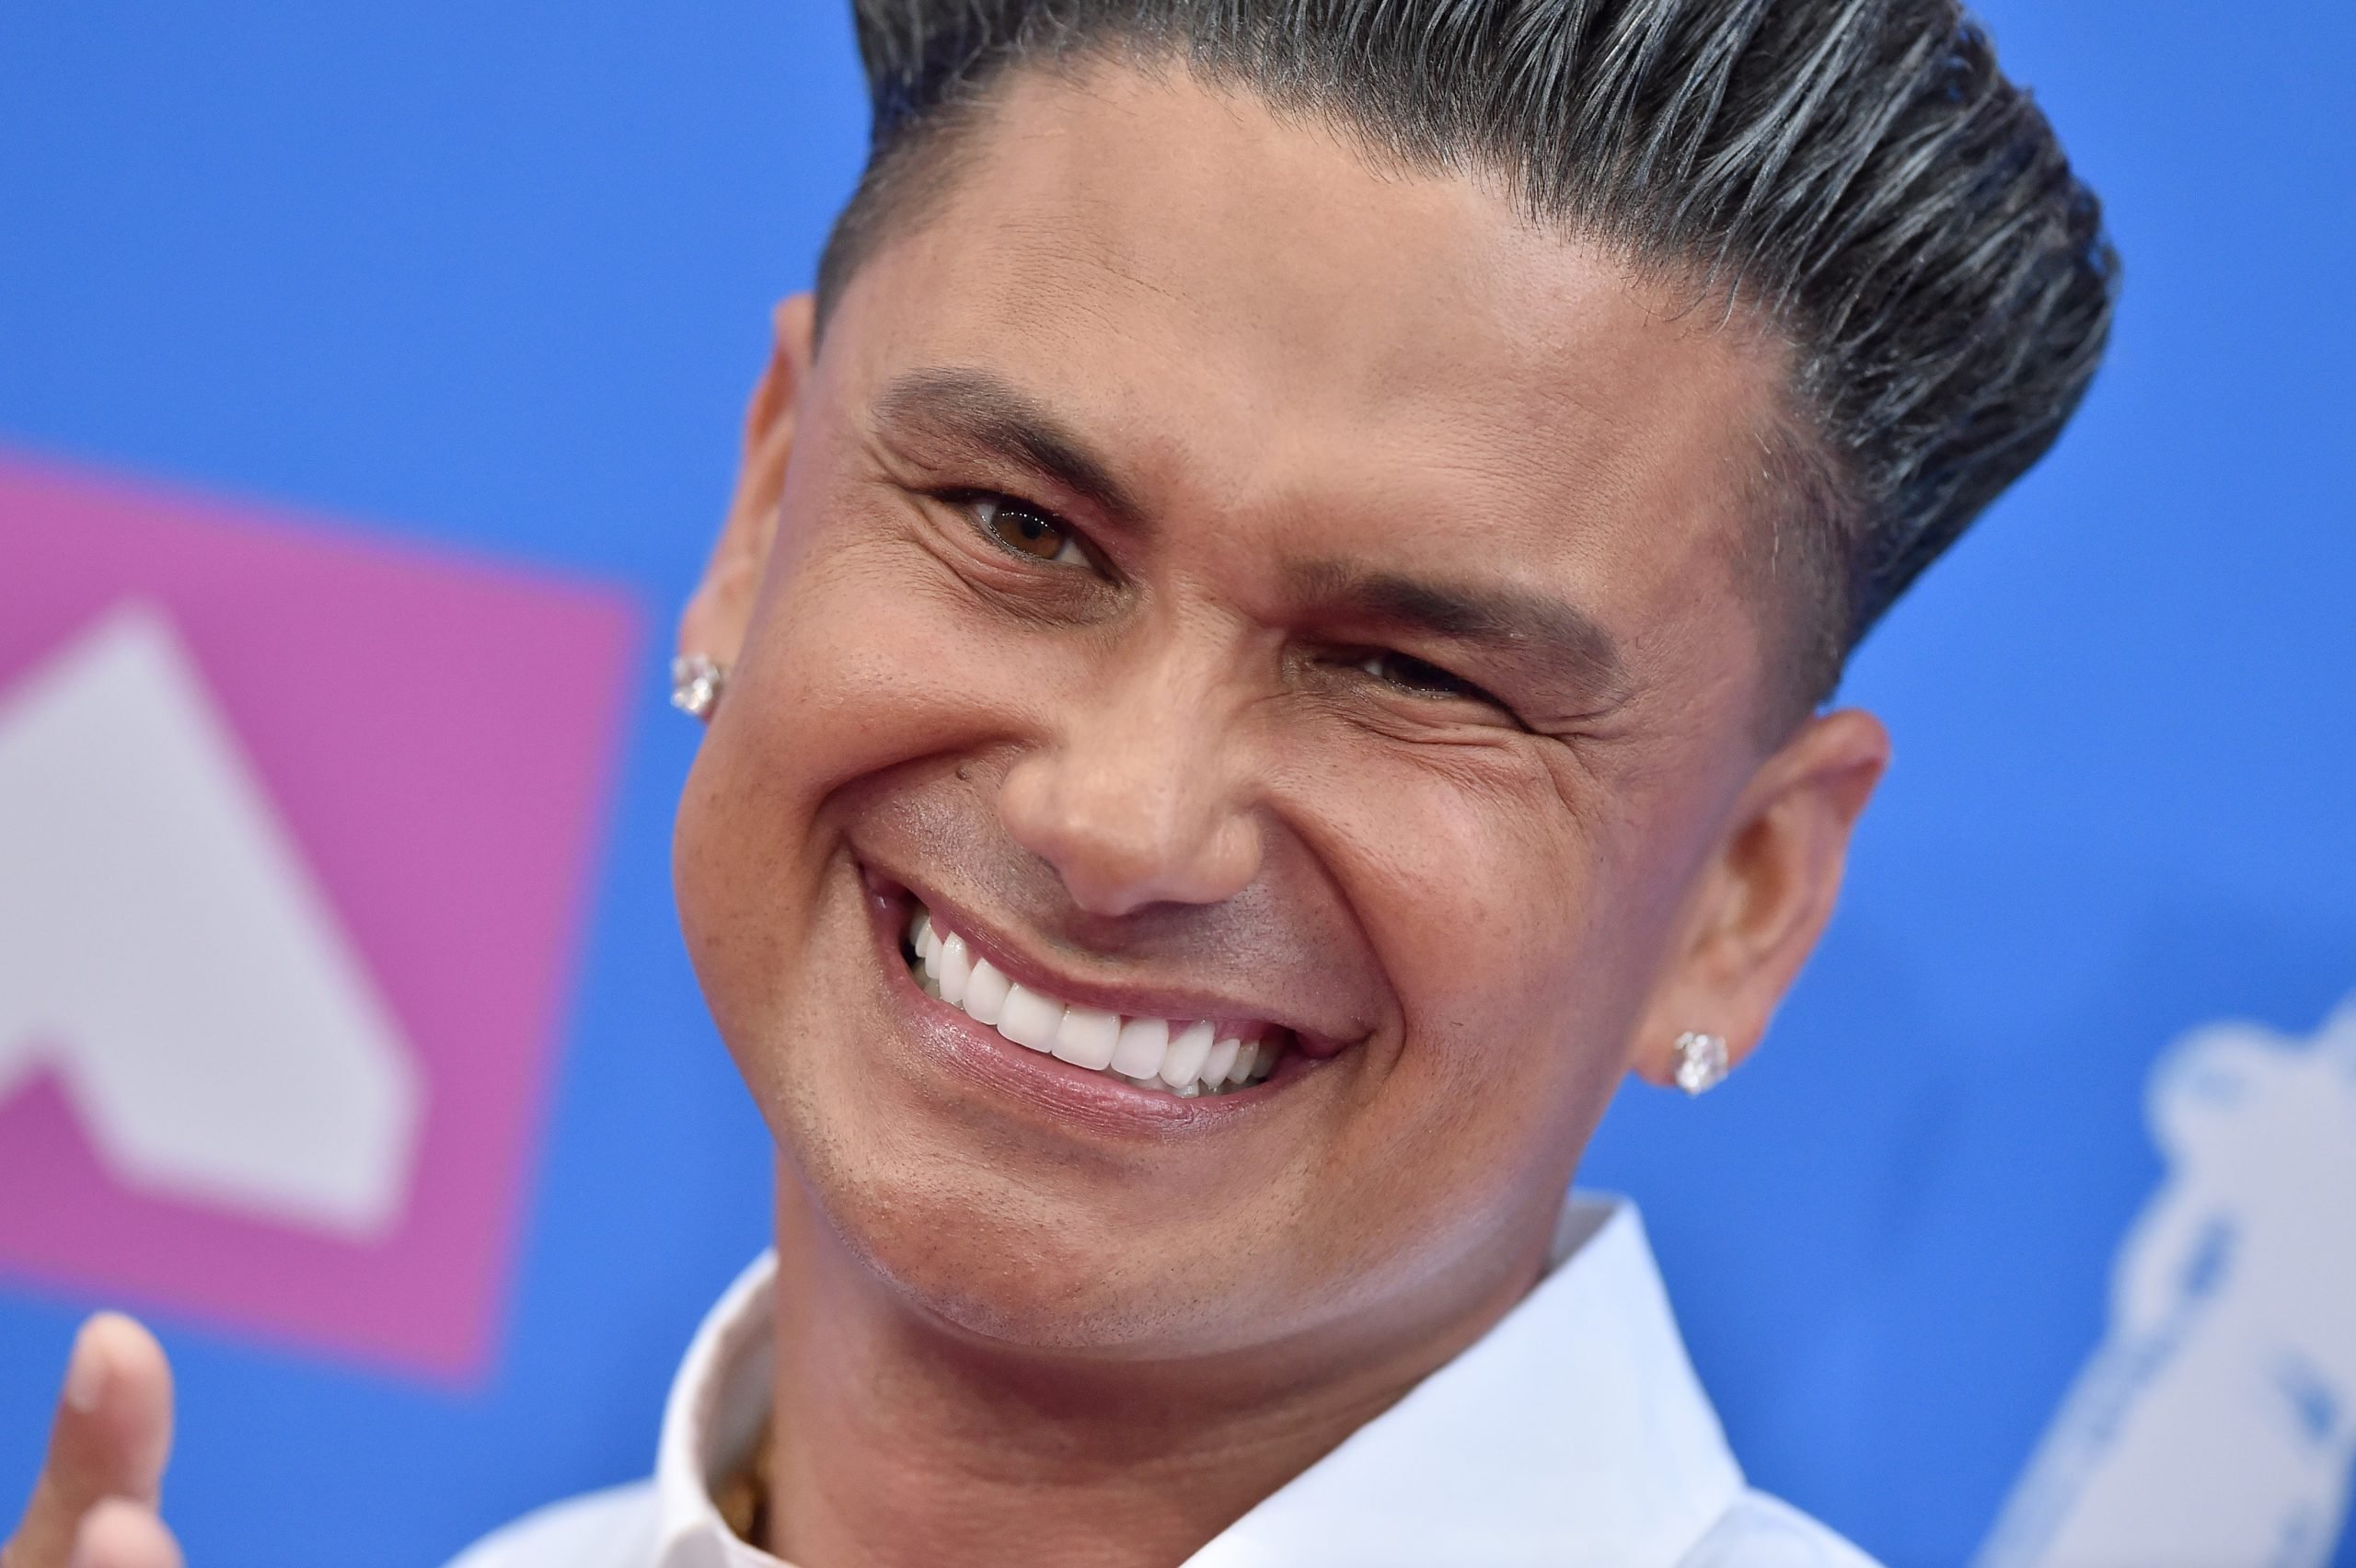 Why did Pauly D and Amanda Markert feud over their daughter